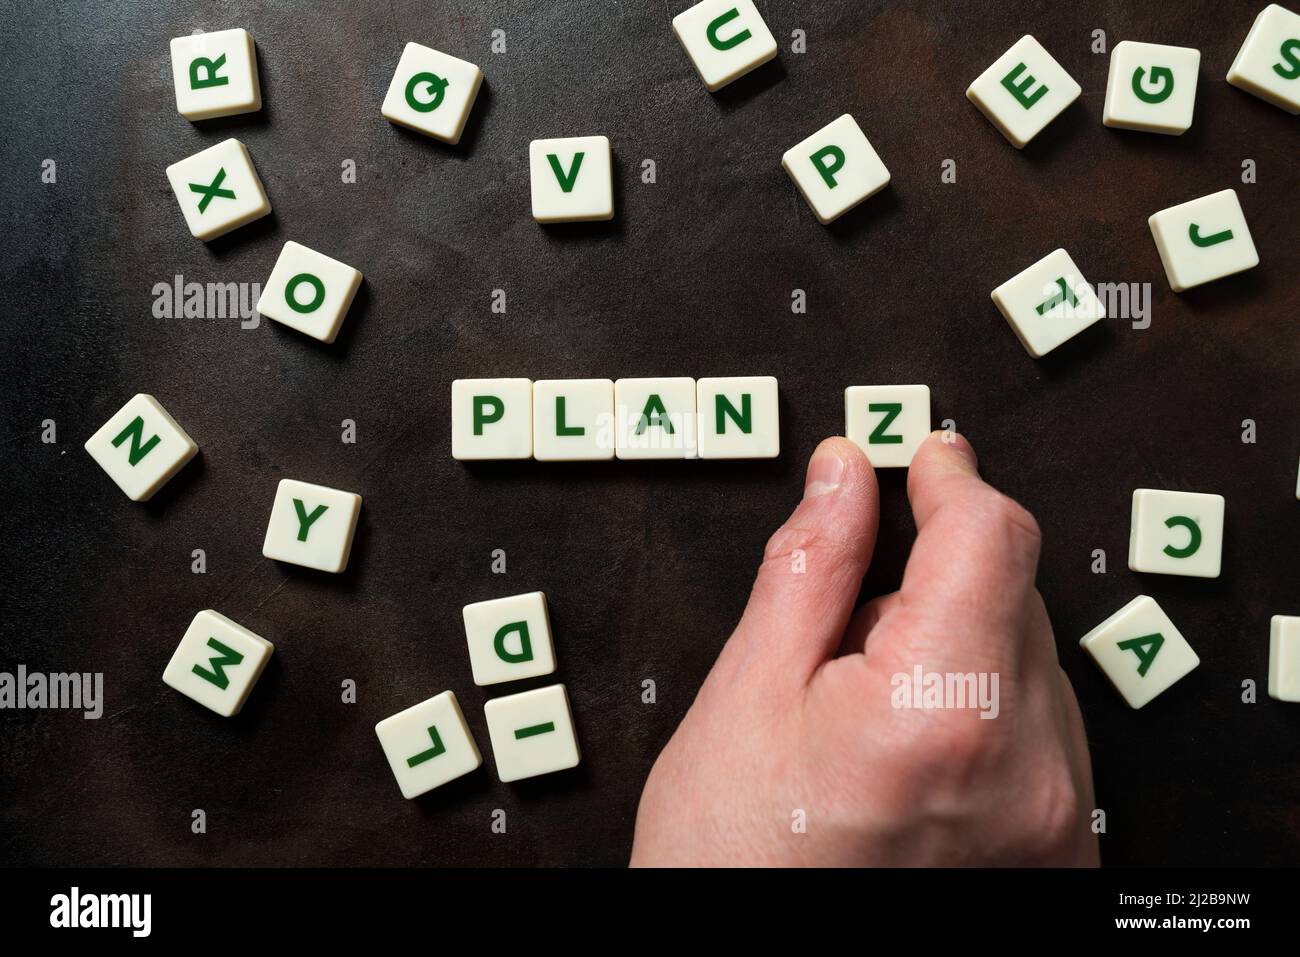 A hand places a piece with the letter Z next to the word PLAN, other pieces appear jumbled around it. Concept of planning for the future, resilience a Stock Photo